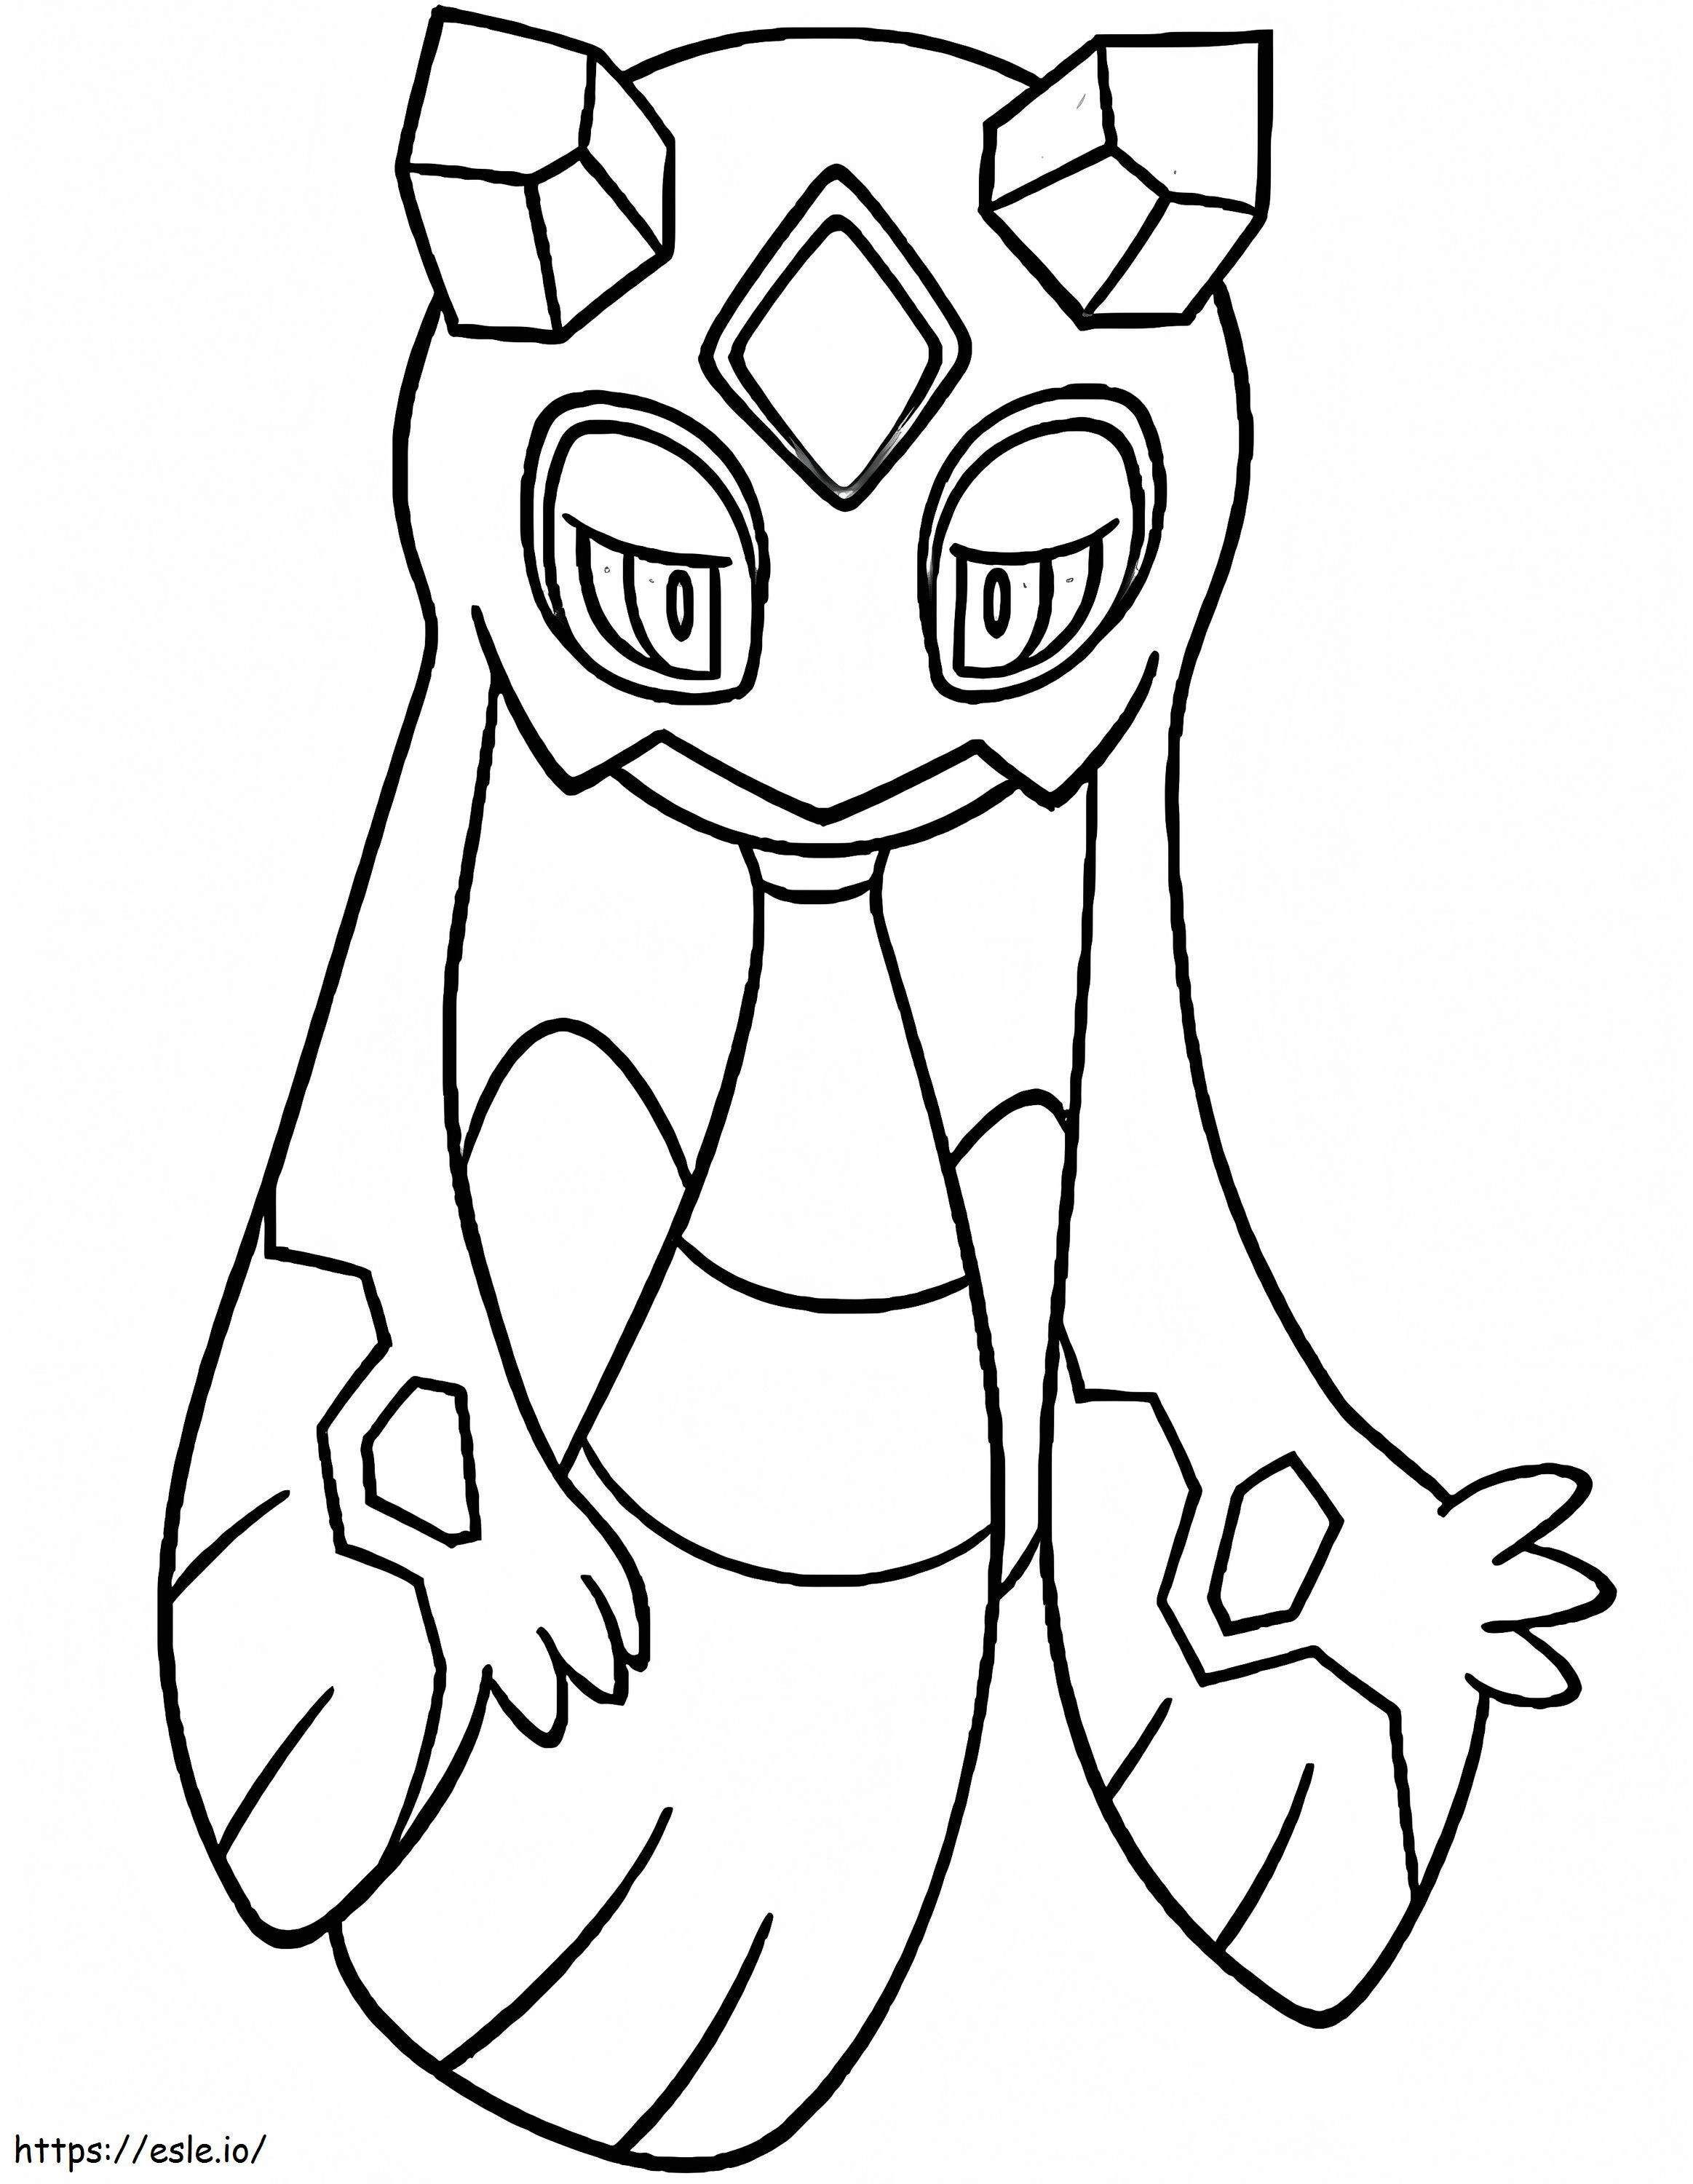 Froslass 2 coloring page